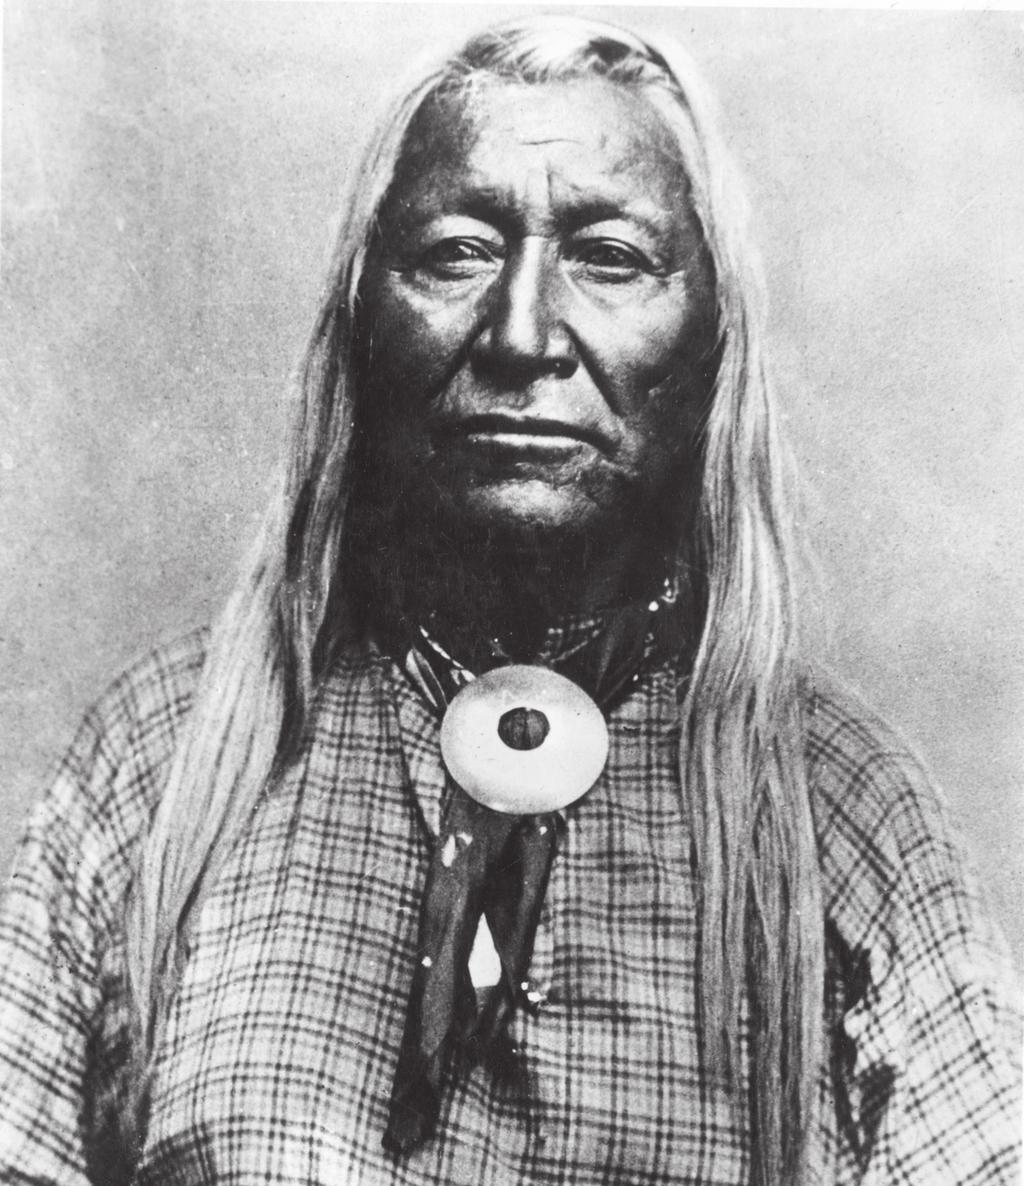 Washakie (1804? 1900) served as a Shoshone chief in the Utah Wyoming Idaho area for sixty years.